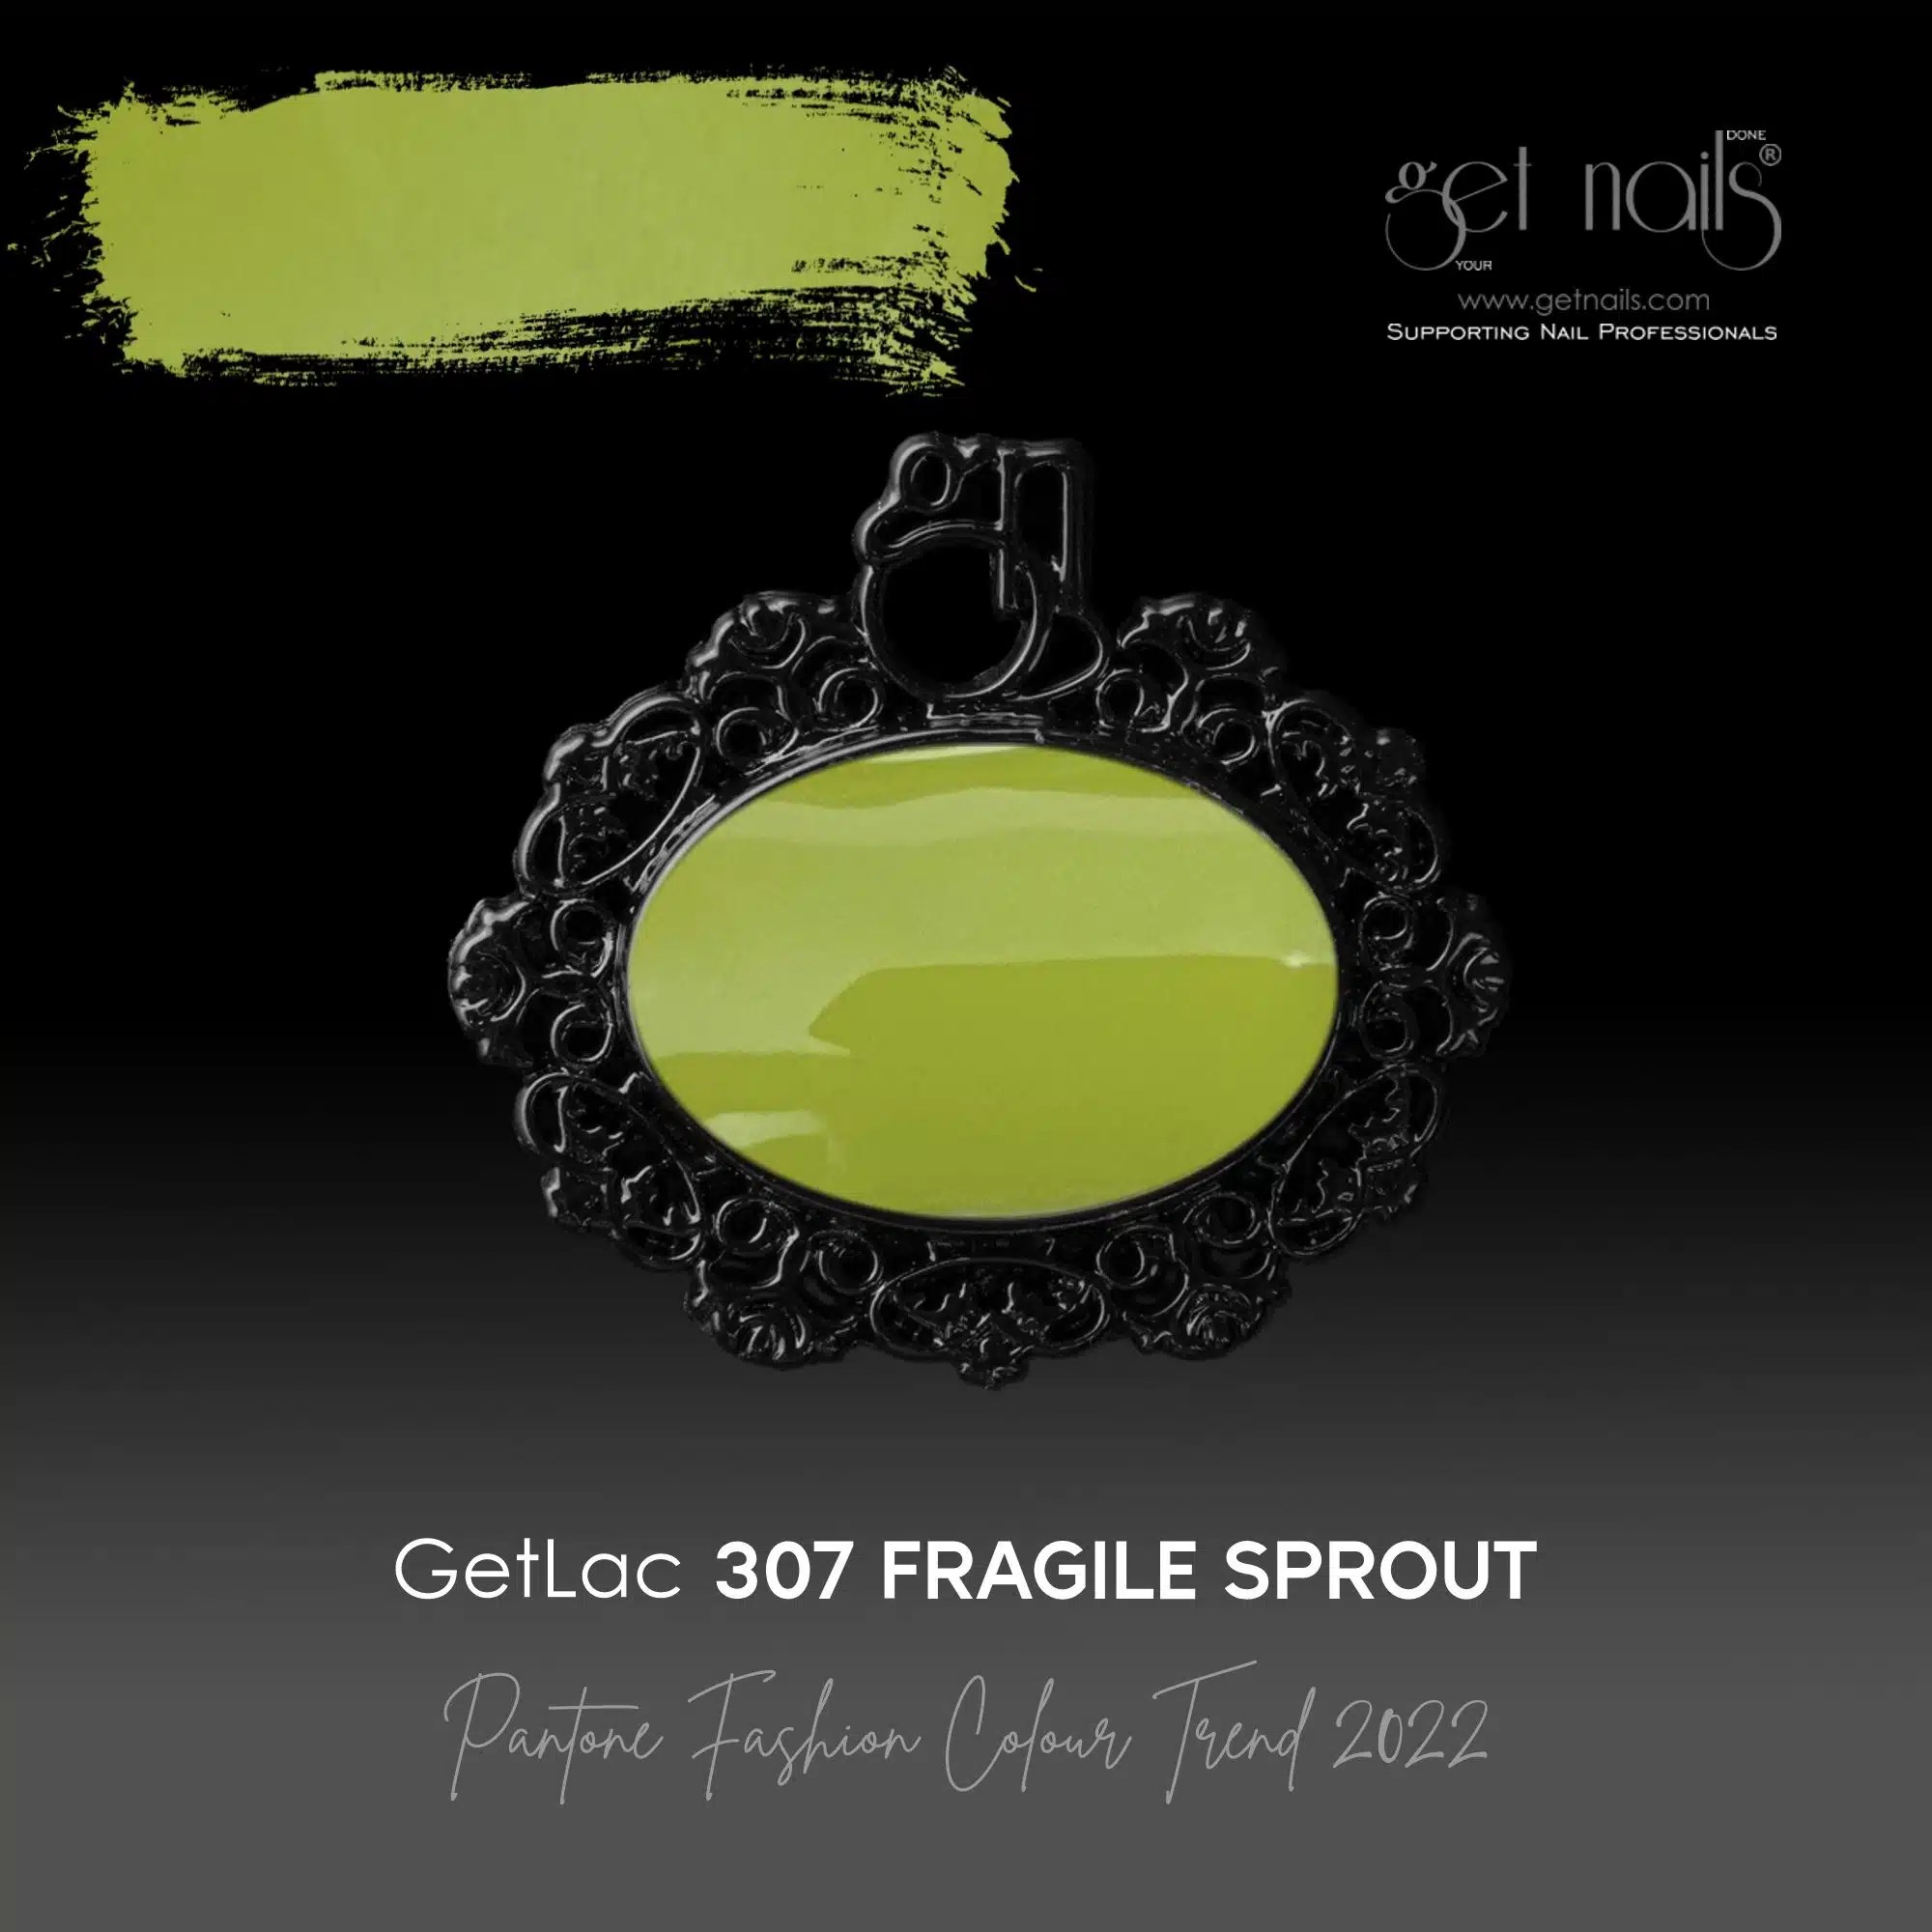 Get Nails Austria - GetLac 307 Fragile Sprout 15 g